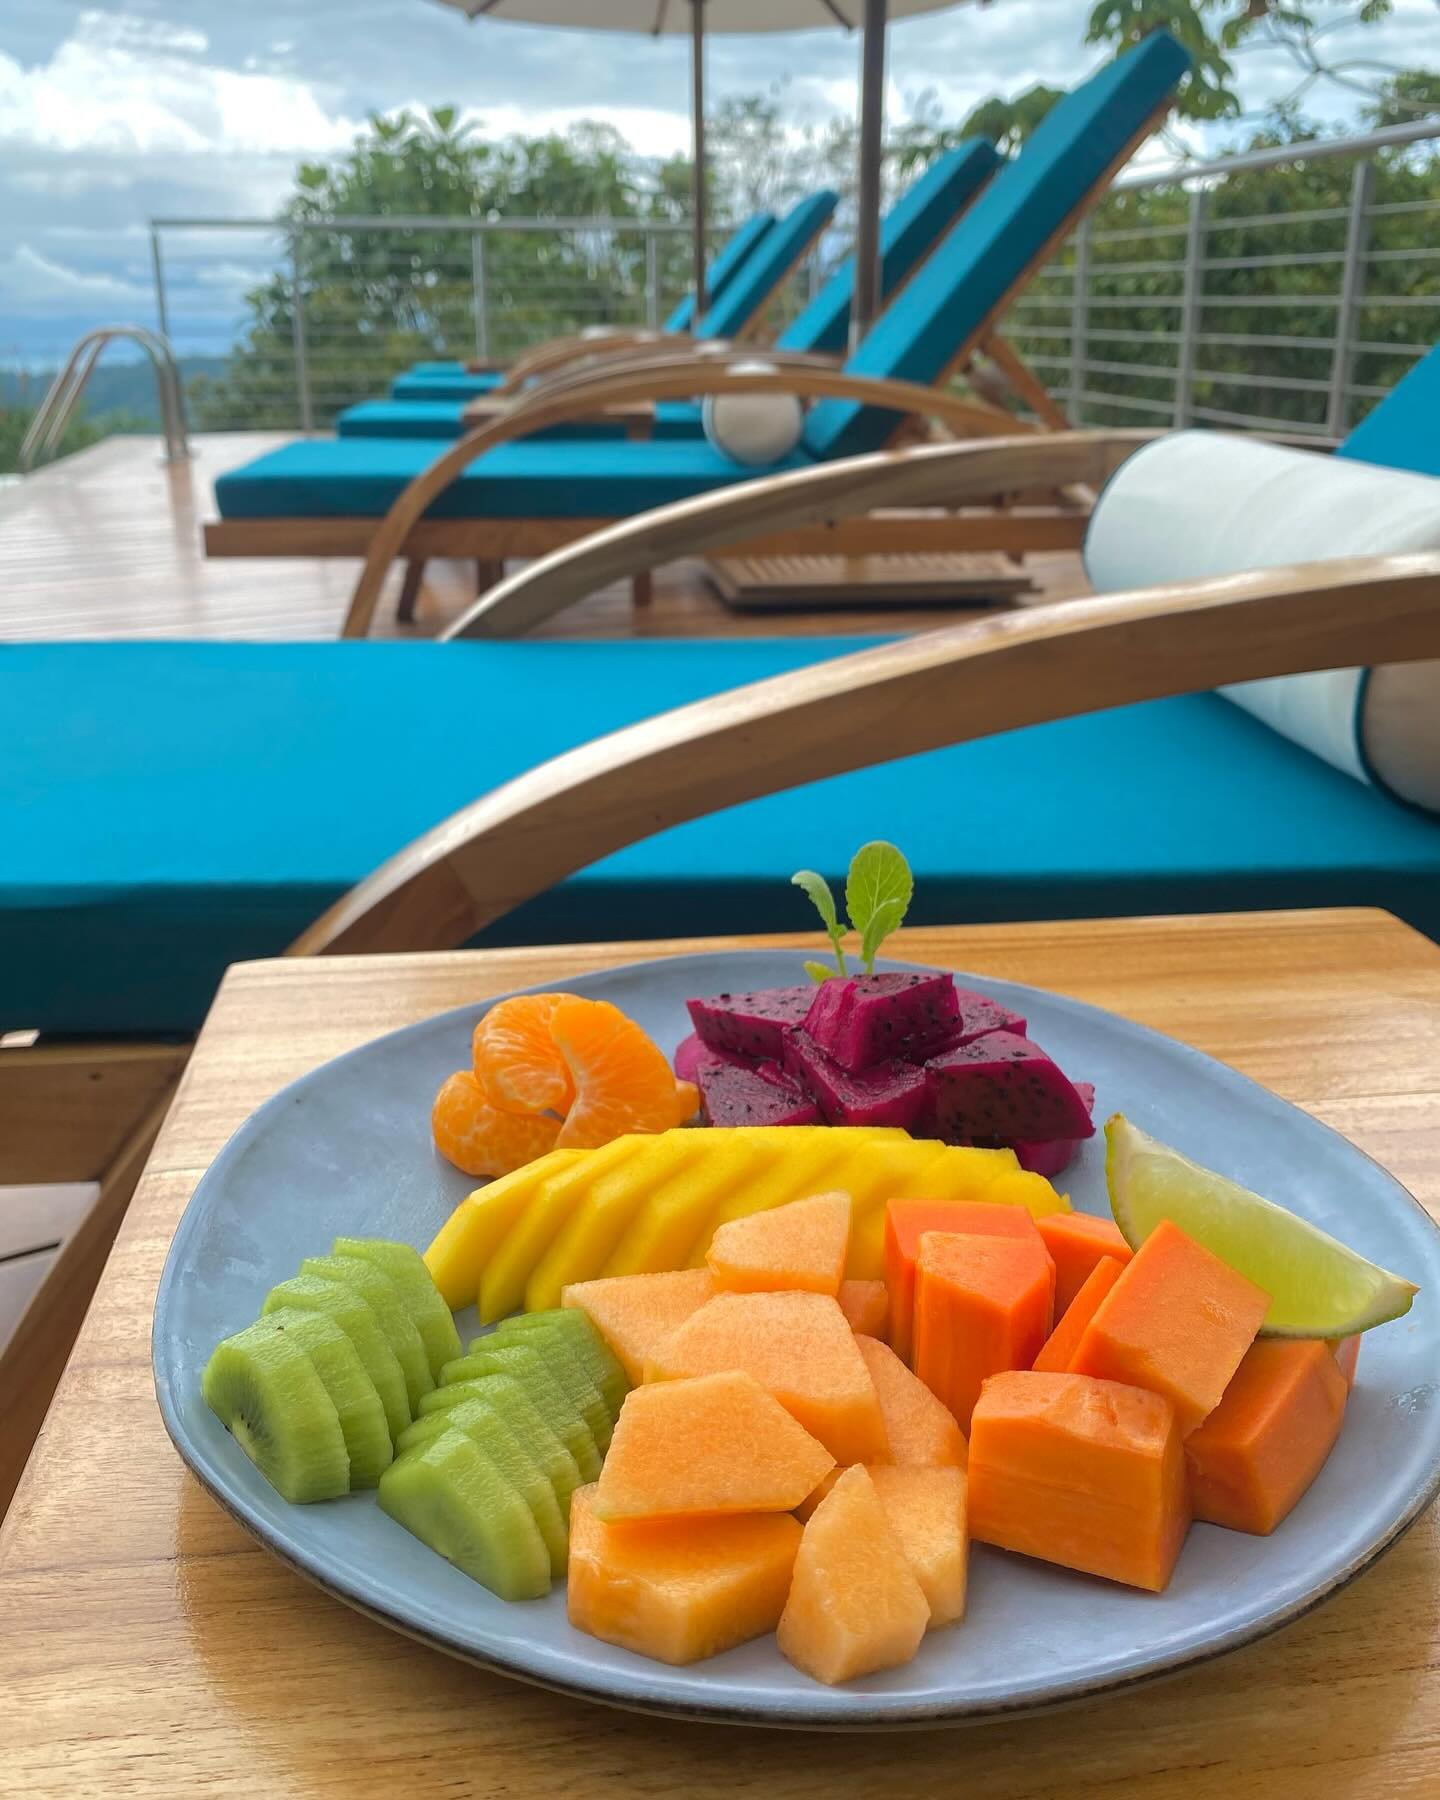 Nourish your body &amp; deepen your connection to nature with fresh ingredients turned into edible art. 

Your stay with us includes three multi-course meals, snacks, infusions, and sunrise coffee &mdash; all made from scratch daily. 
.
.
.
.
.
#drea